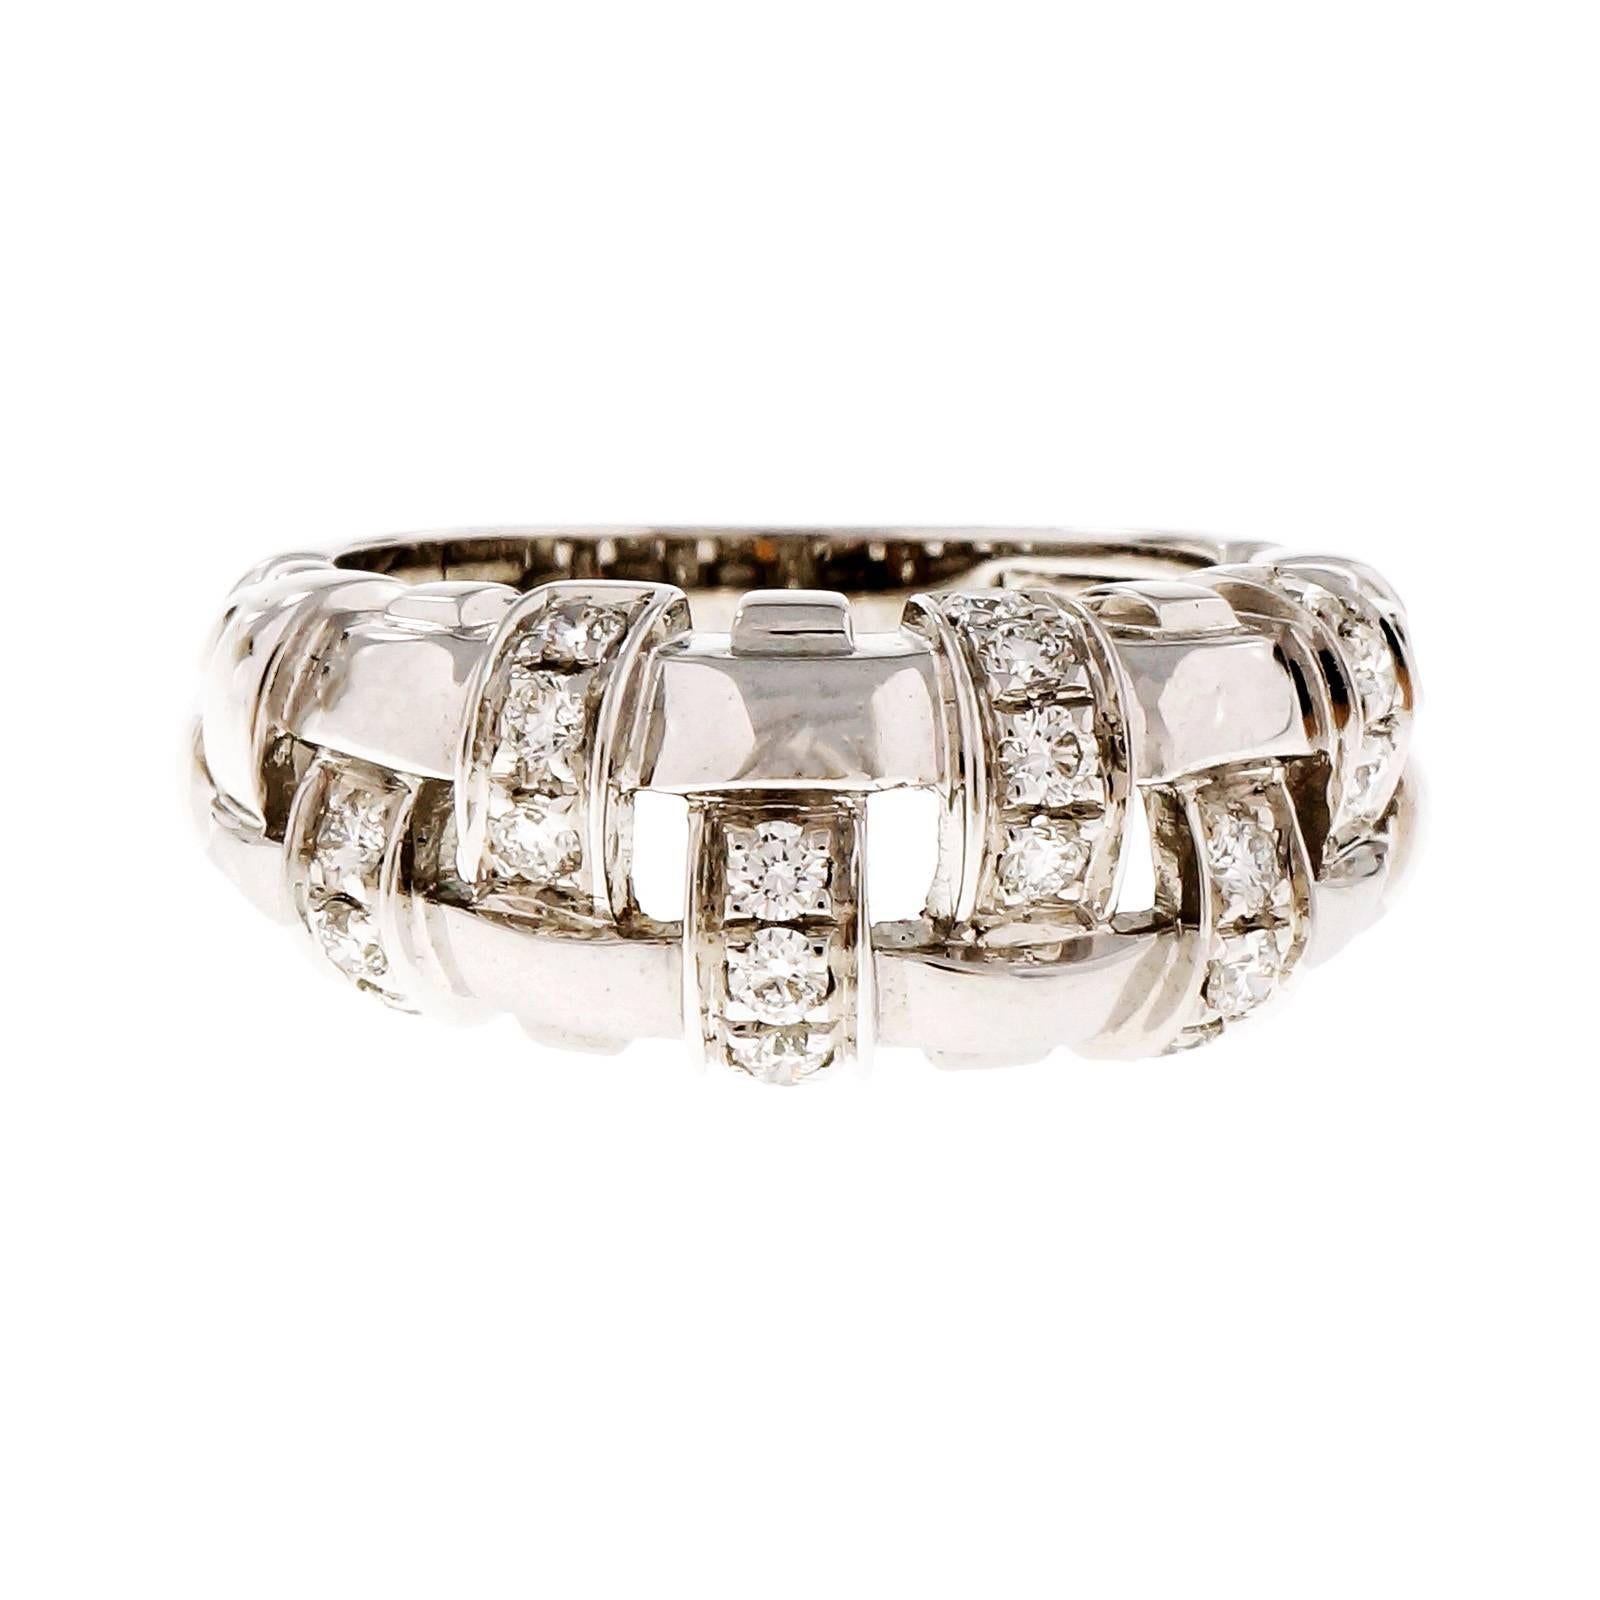 Tiffany & Co. basket weave 18k white gold diamond ring.

19 round diamonds, approx. total weight .50cts, F, VS
18k white gold
Tested: 18k
Stamped: 750
Hallmark: T & Co ©2002 Italy
l6.2 grams
Width at top: 8.34mm
Height at top: 5.03mm
Width